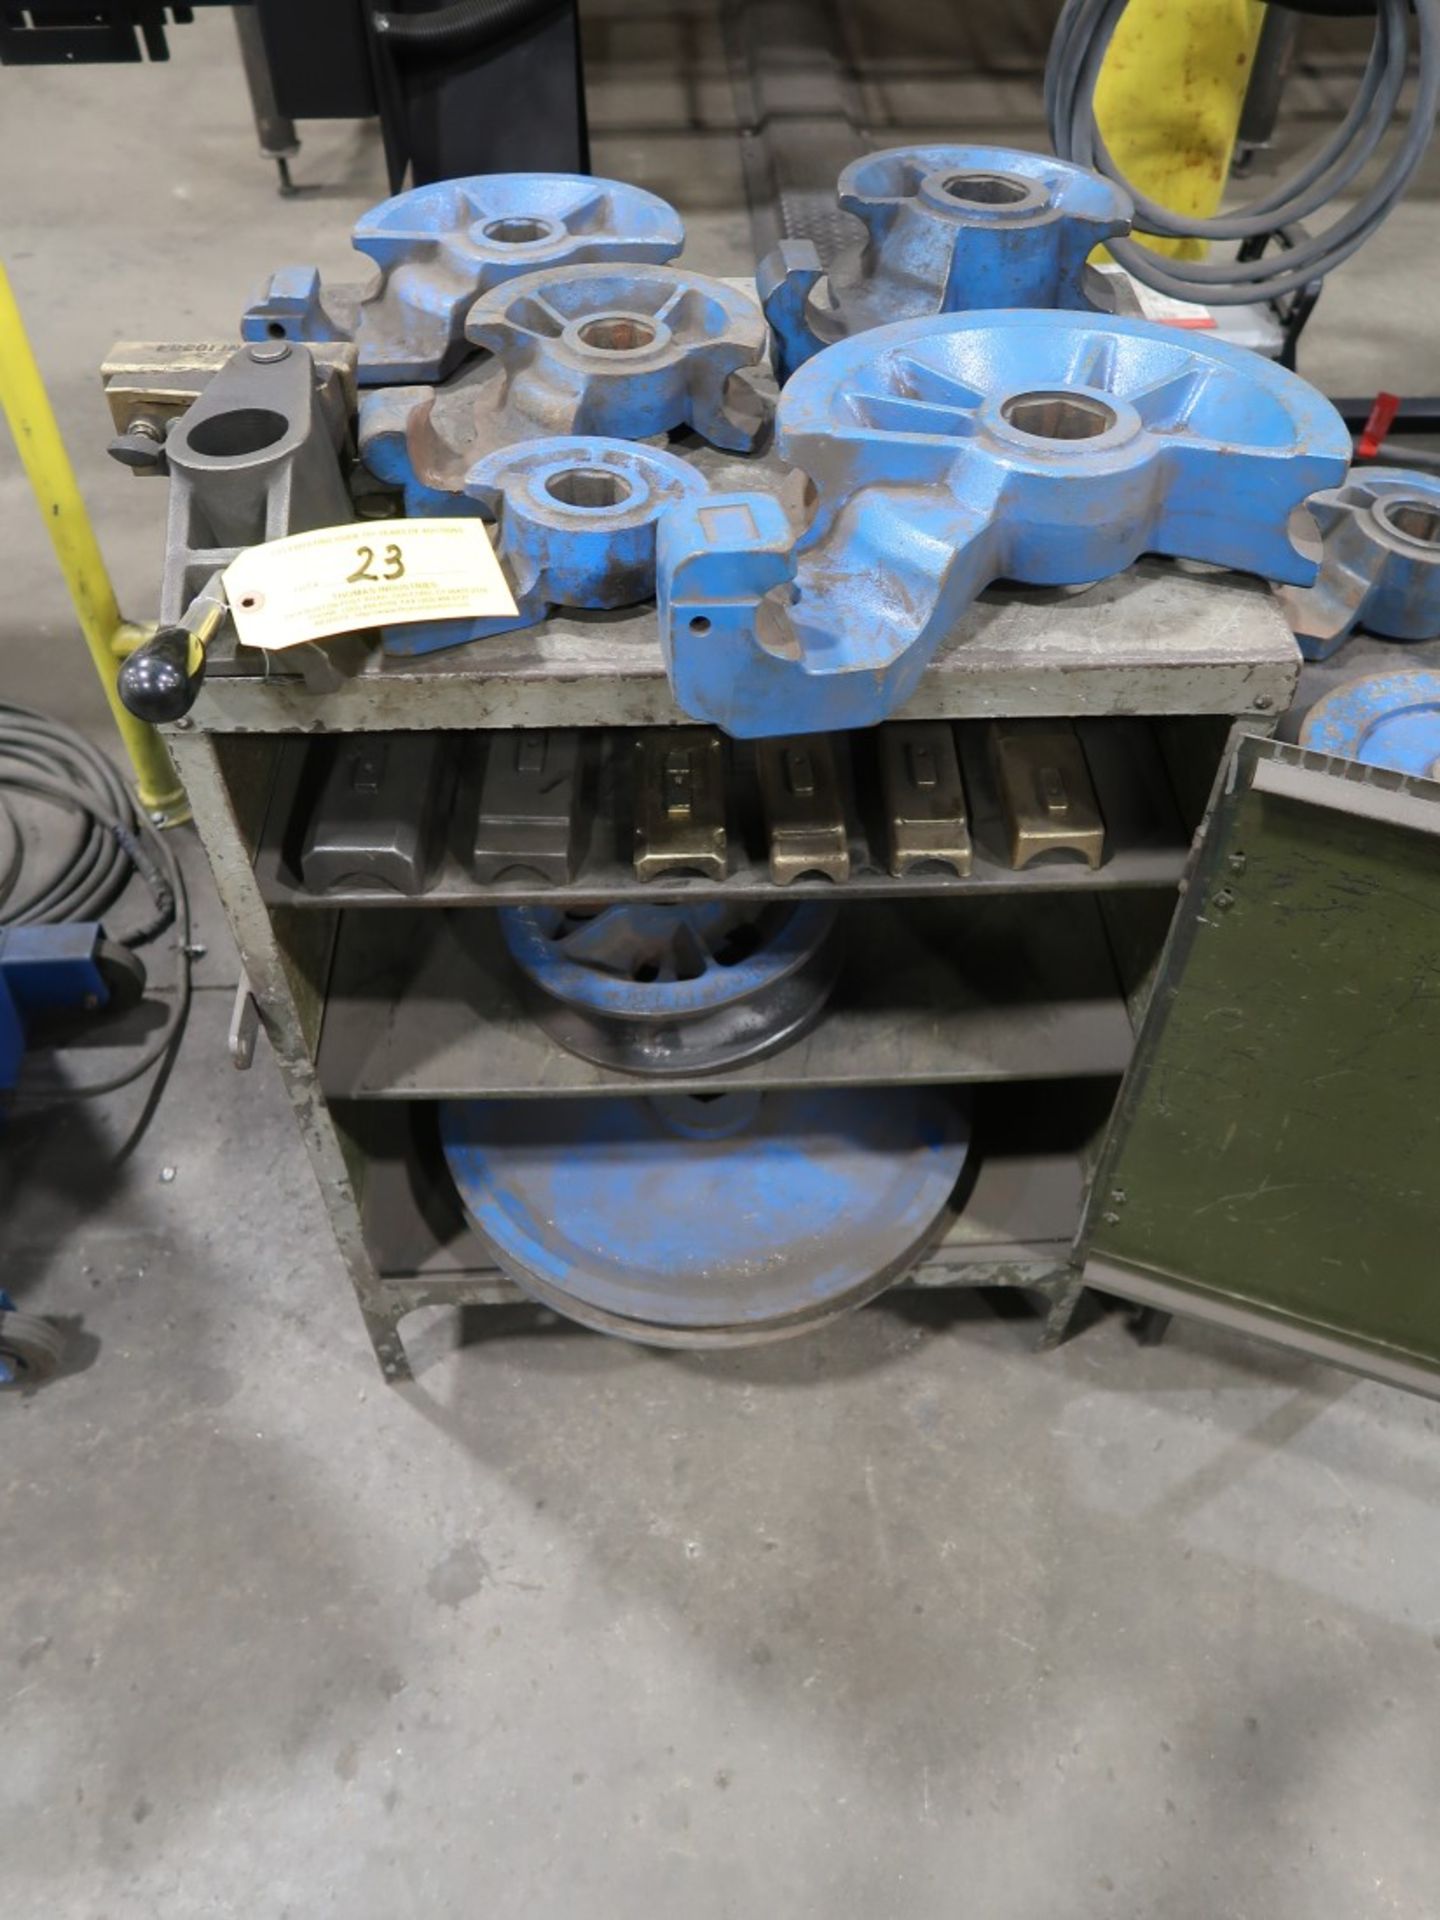 2014 CML Ercolina Pipe Bender Model TOP 030 TRIF, S/N 3014115 w/ Large Assortment of Dies, Touch - Image 4 of 8